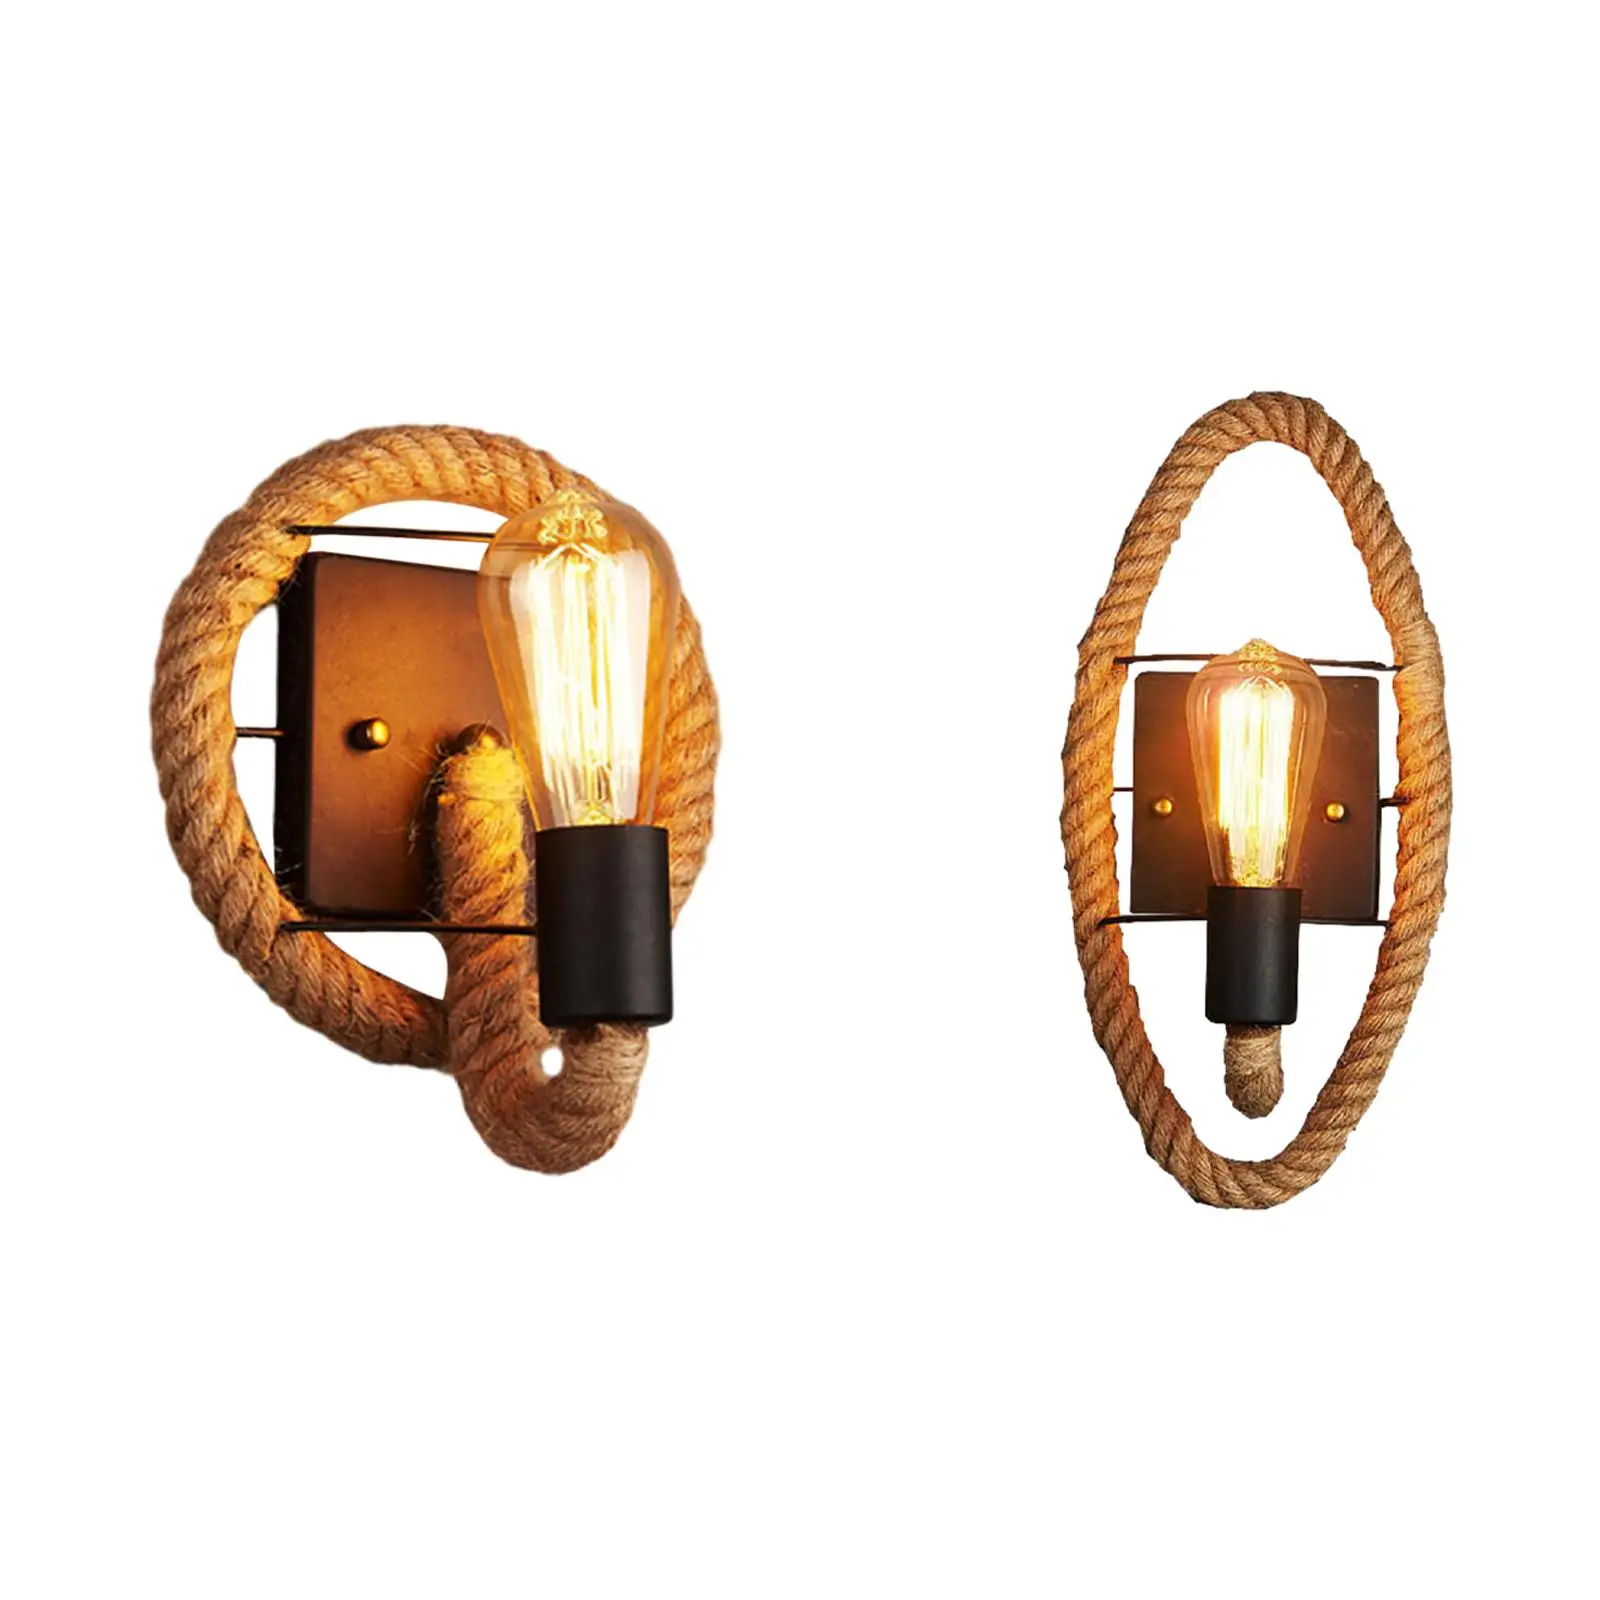 Industrial Wall Sconce Decoration Vintage Style Antique Wall Lighting Hemp Rope Wall Lamp for Stairway Bar Living Room Club